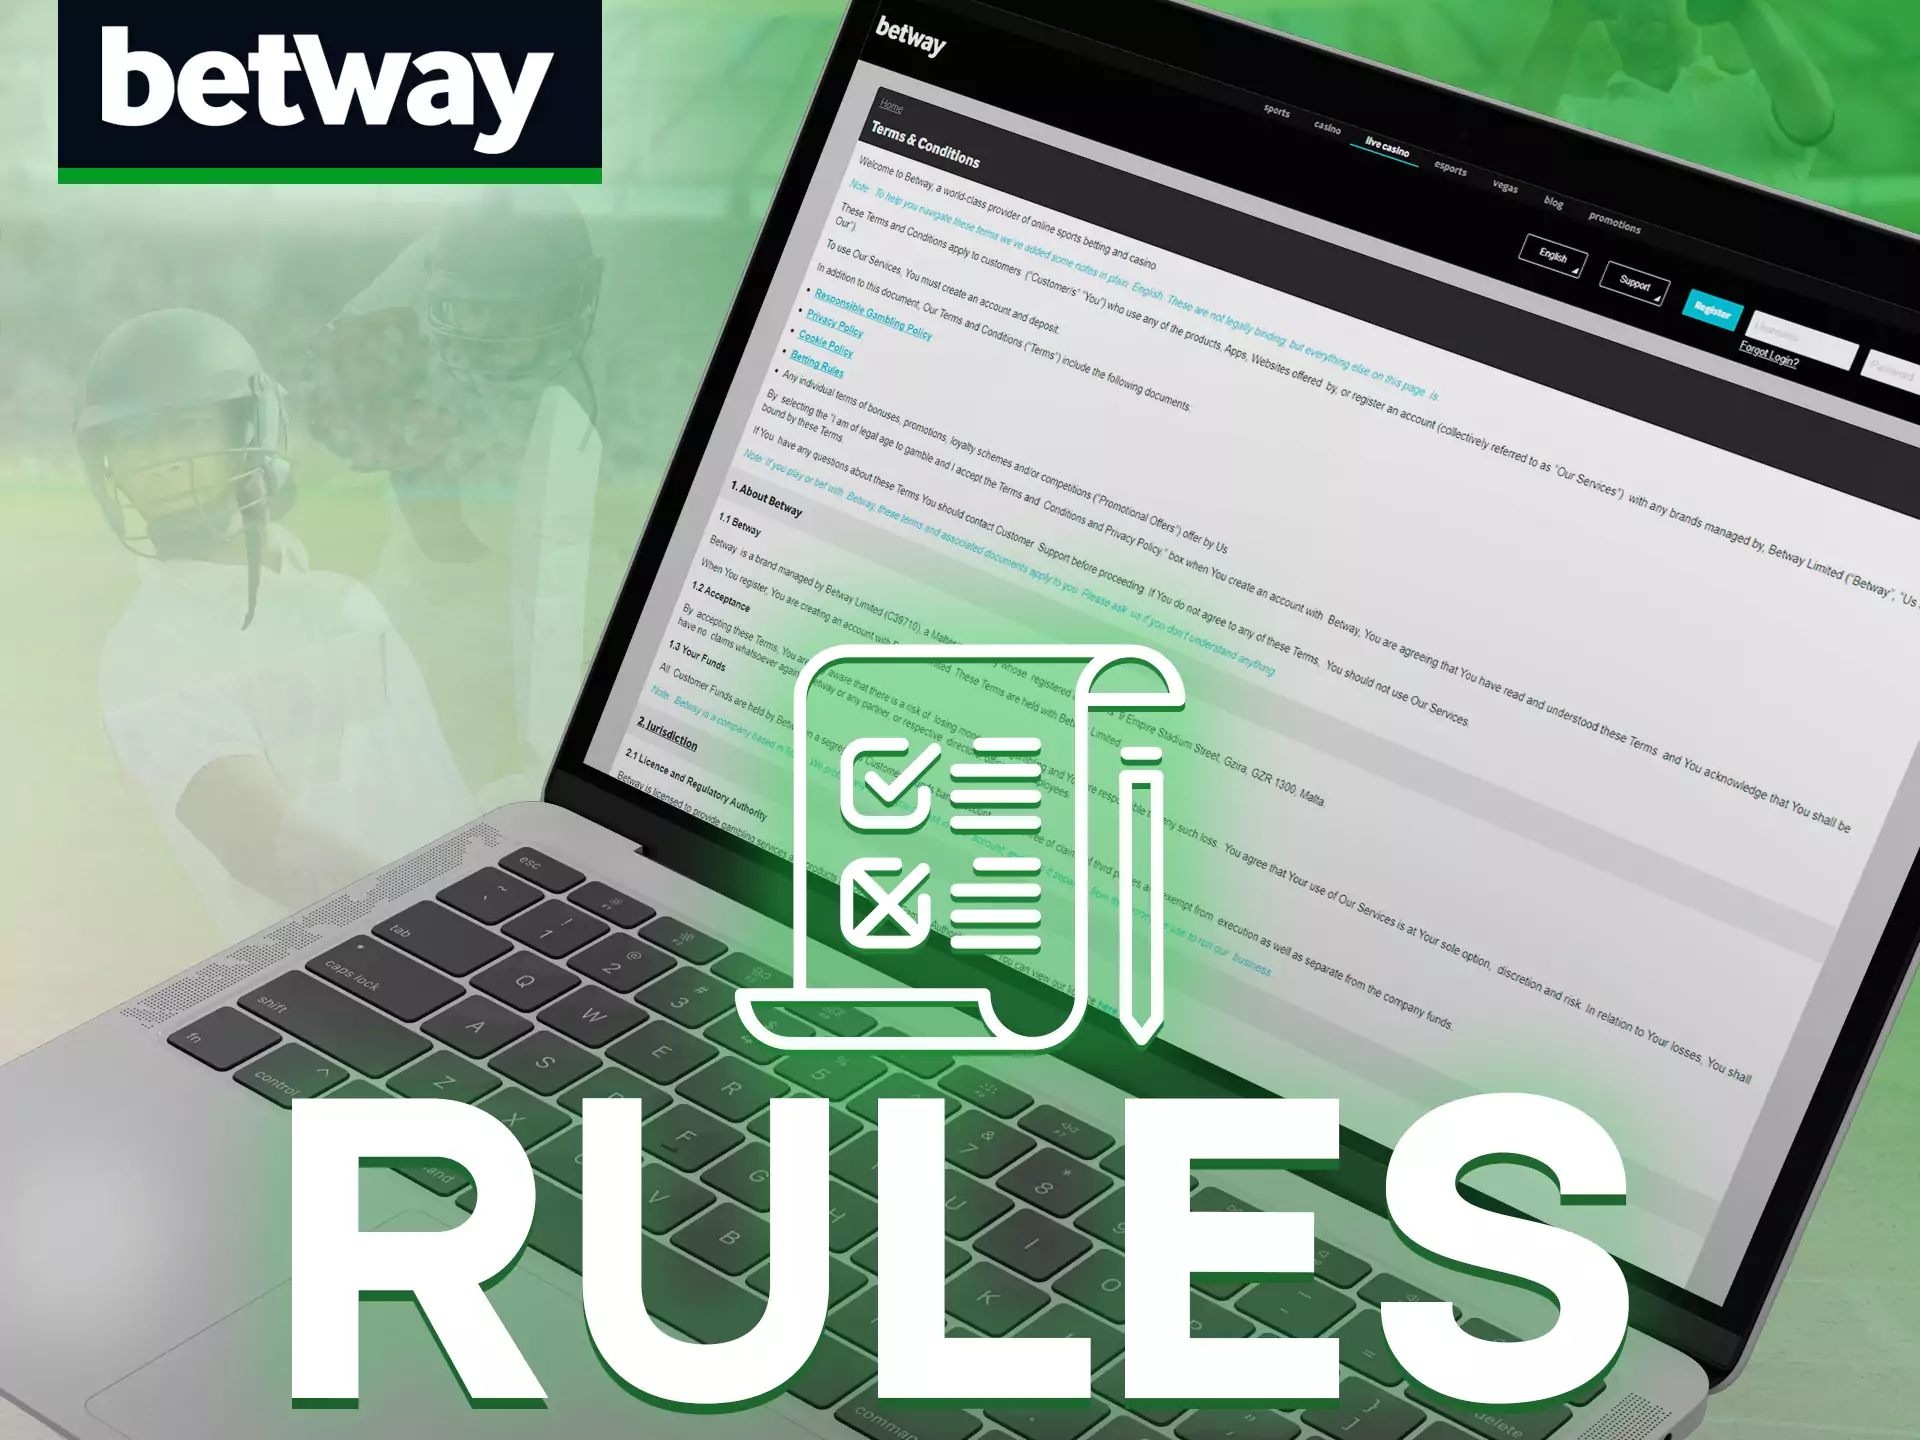 Follow betting rules of Betway betting company.